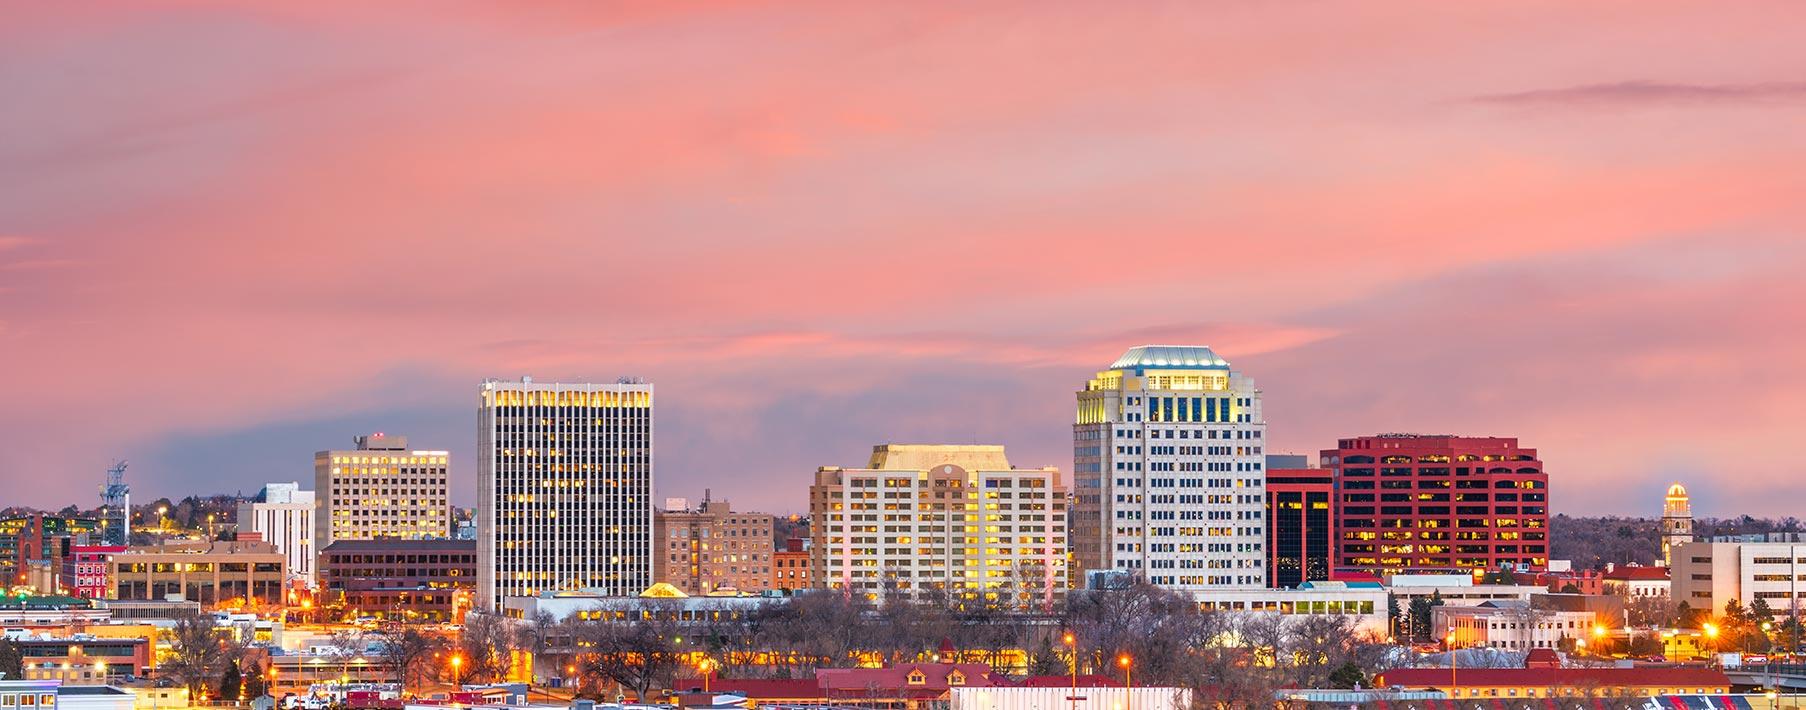 Image of the Colorado Springs skyline with pink clouds above